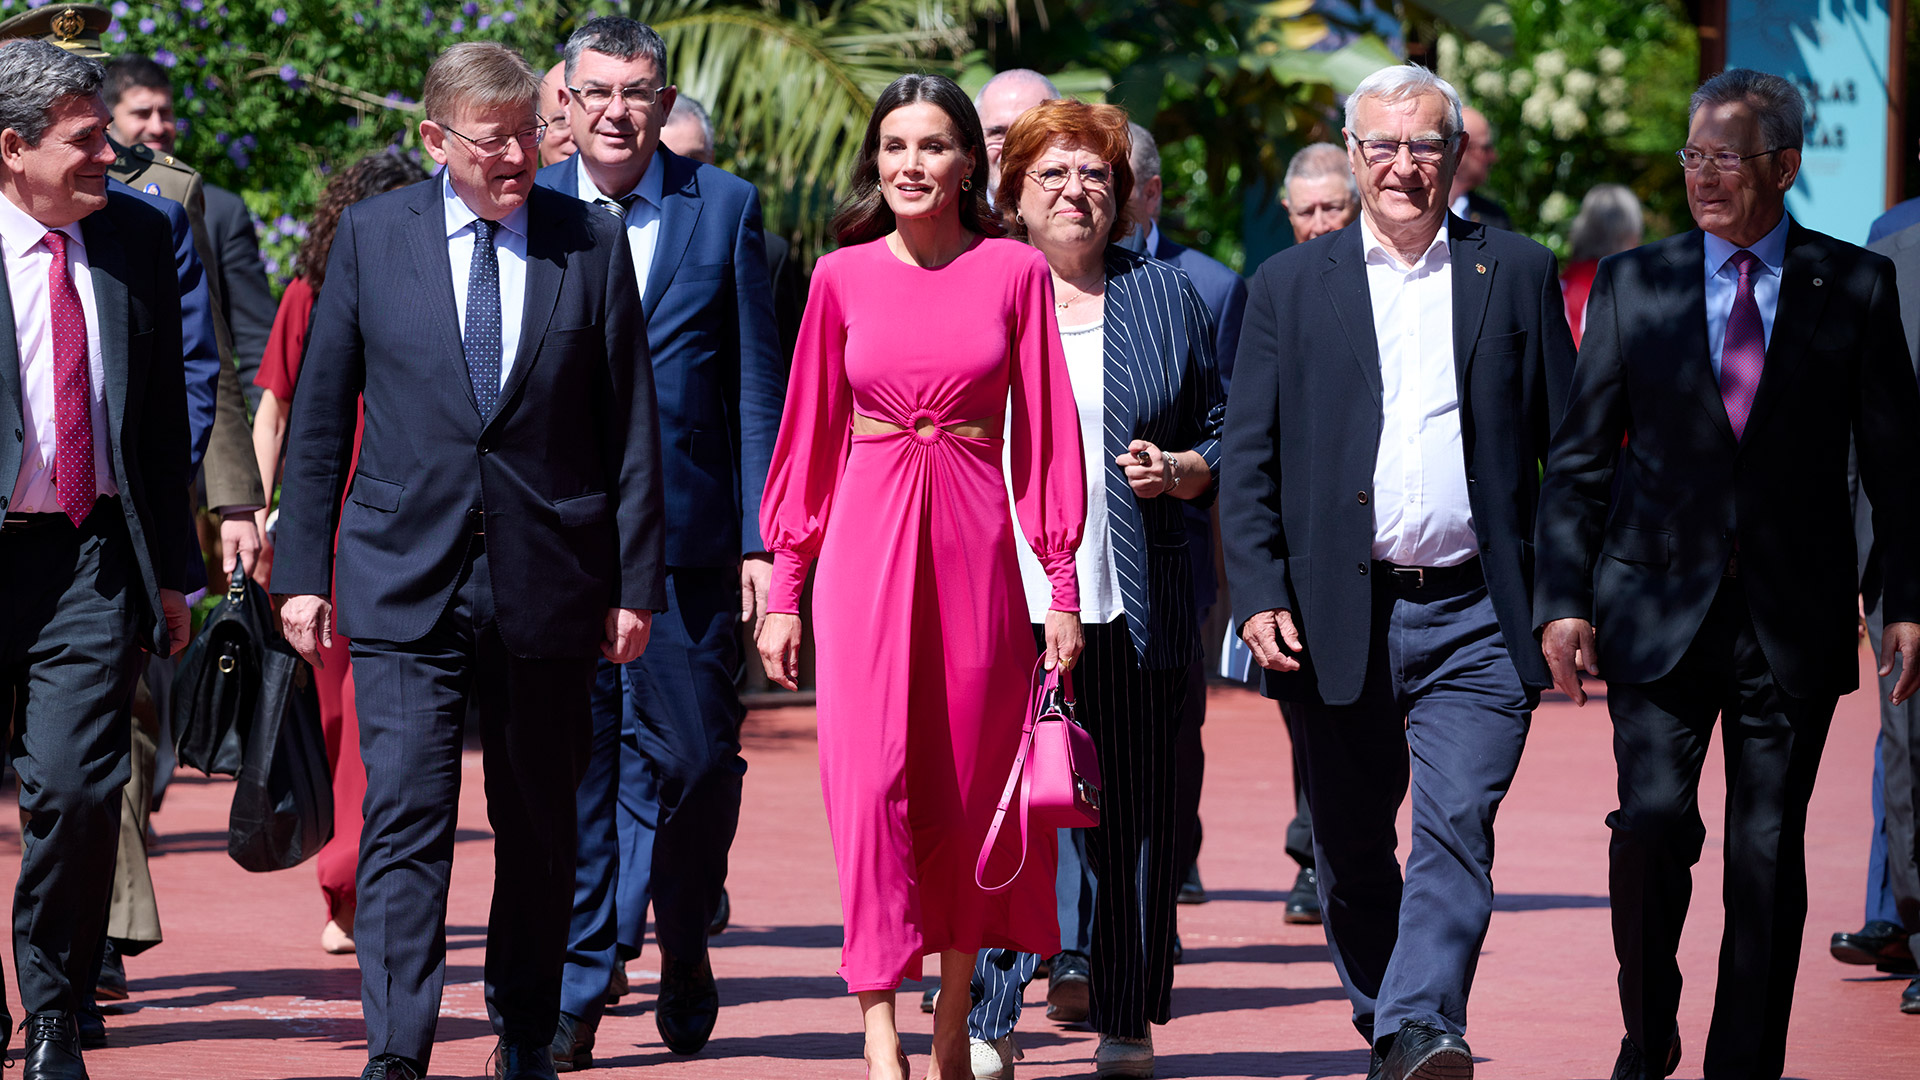 The monarch joined one of the latest fashion trends thanks to a model made by the Sevillian firm Cayro Woman, in an event that was held in Valencia for the World Red Cross and Red Crescent Day (Photo by Carlos Alvarez H./Getty Images)